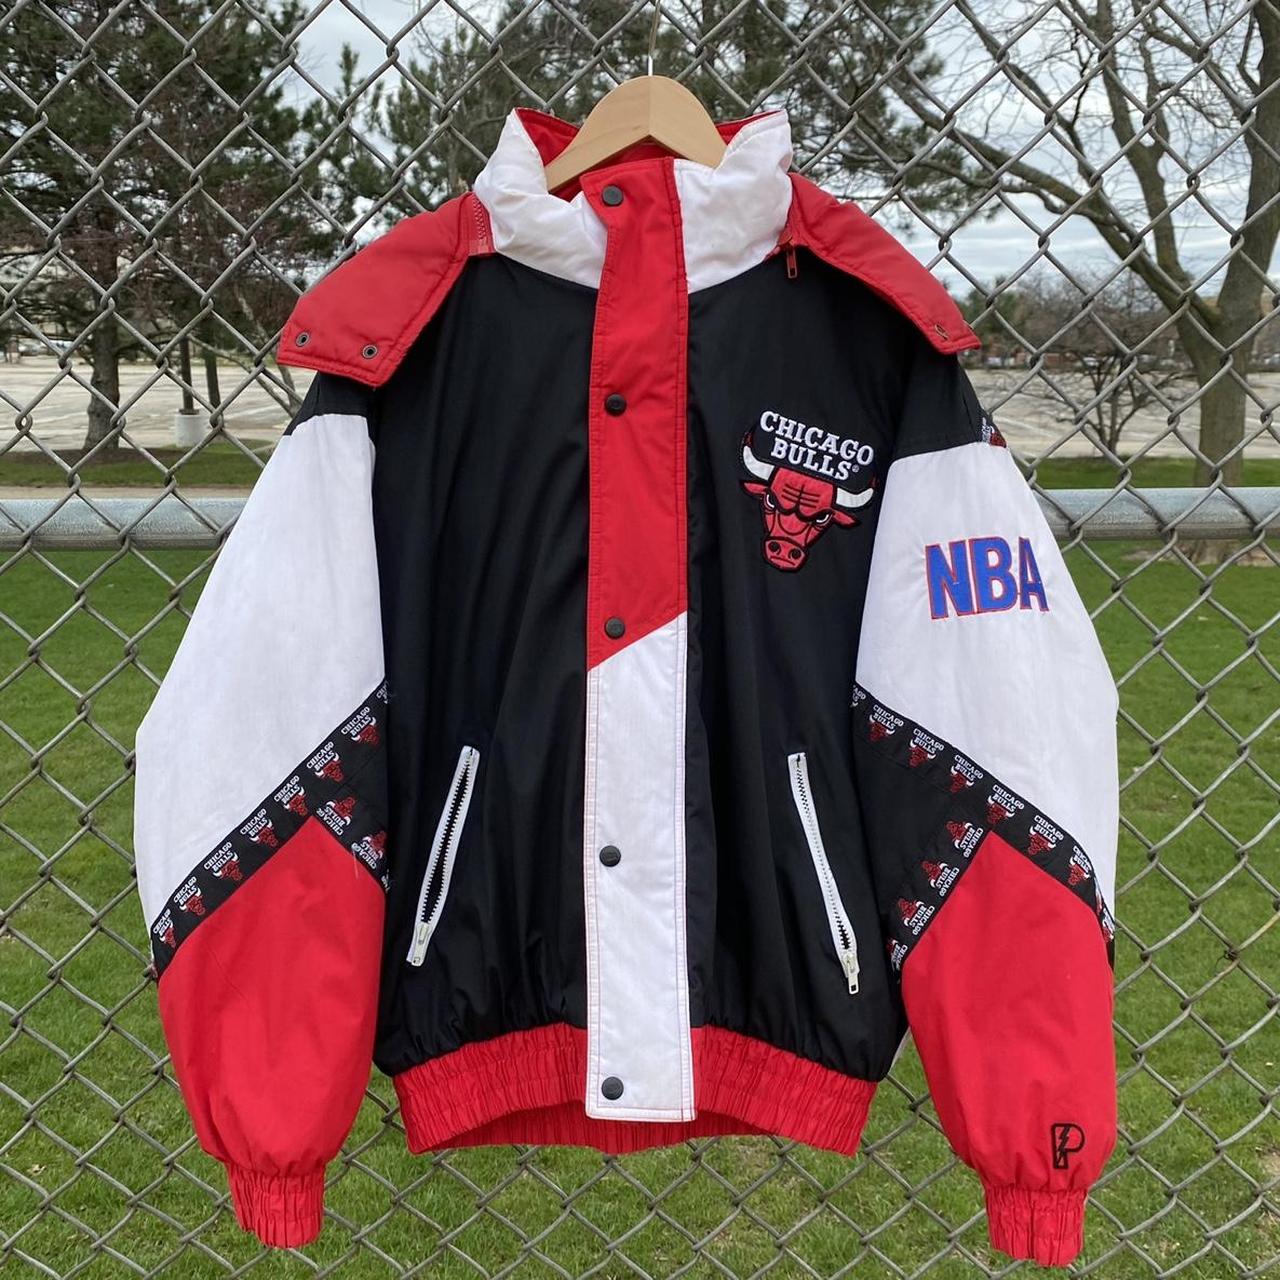 Vintage Chicago Bulls Puffer Jacket - The Vintage Twin